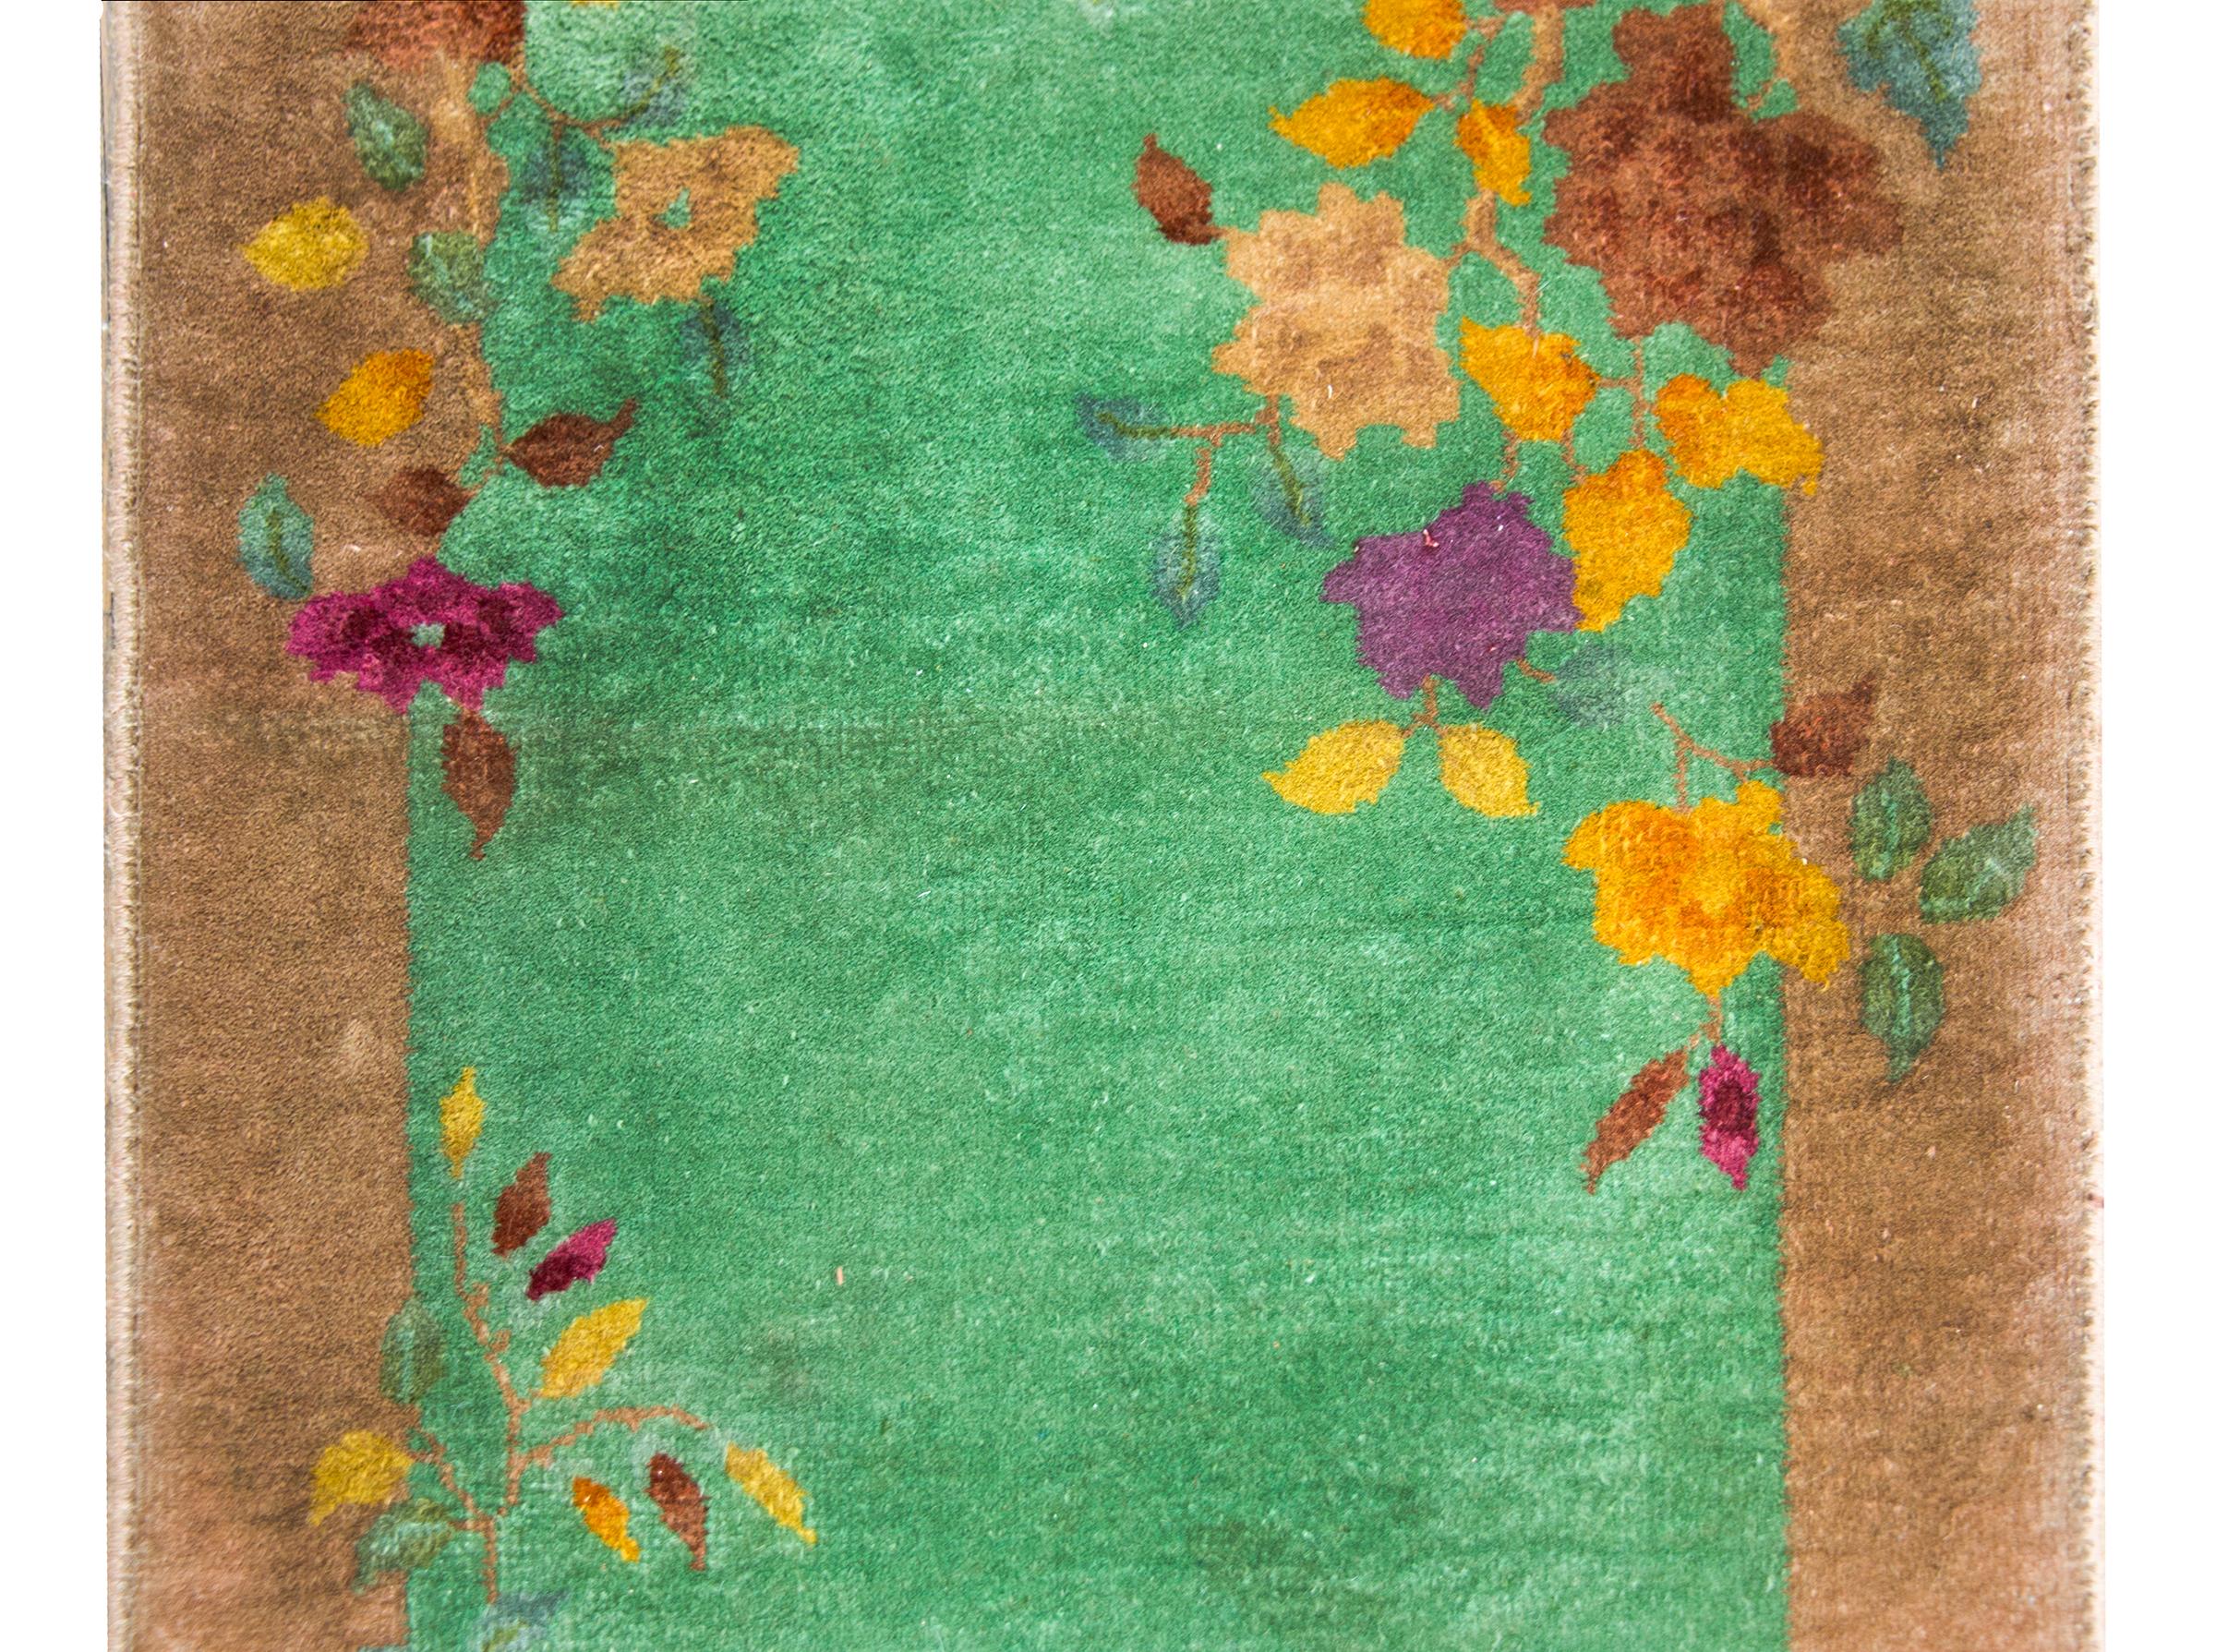 A fantastic early 20th century Chinese Art Deco rug with a mint green field surrounded by a tan undulating border overlaid with brown, gold, peach and fuchsia peonies.